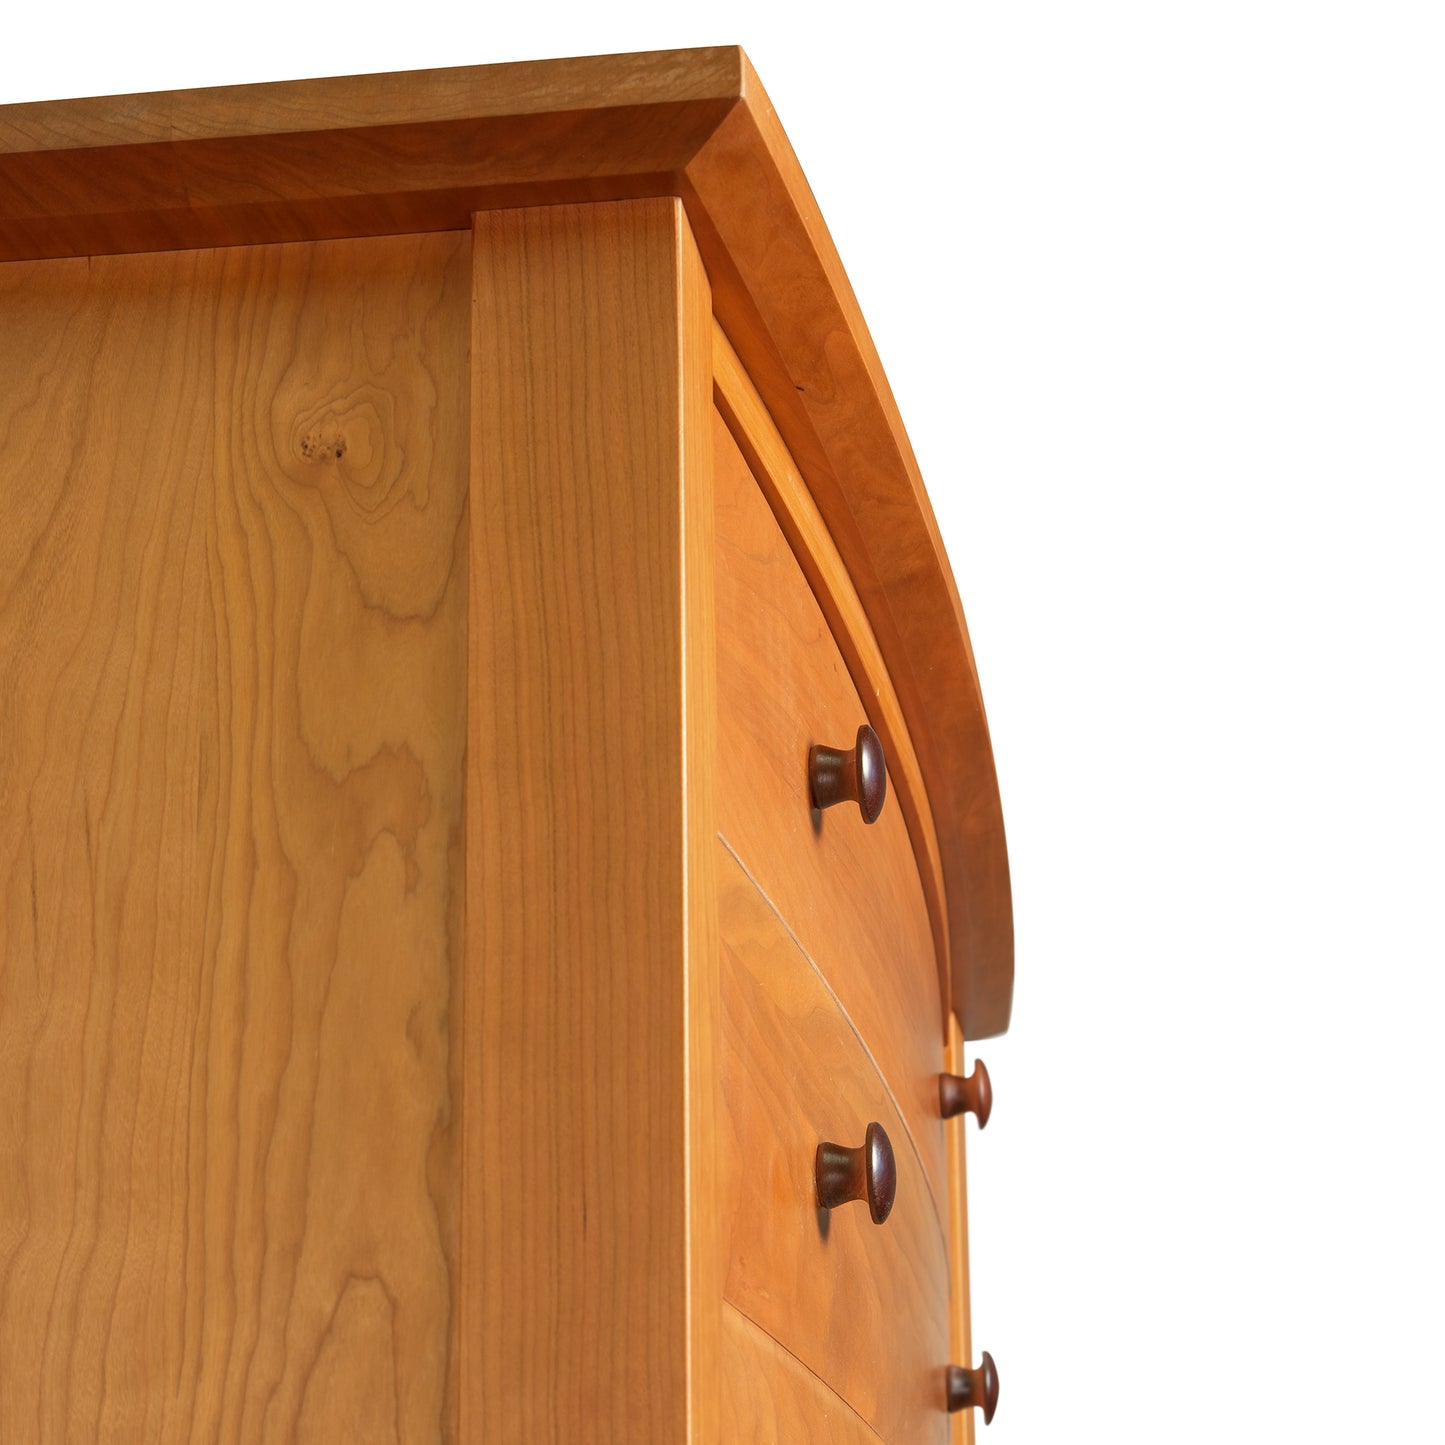 A close up of a wooden chest of drawers.